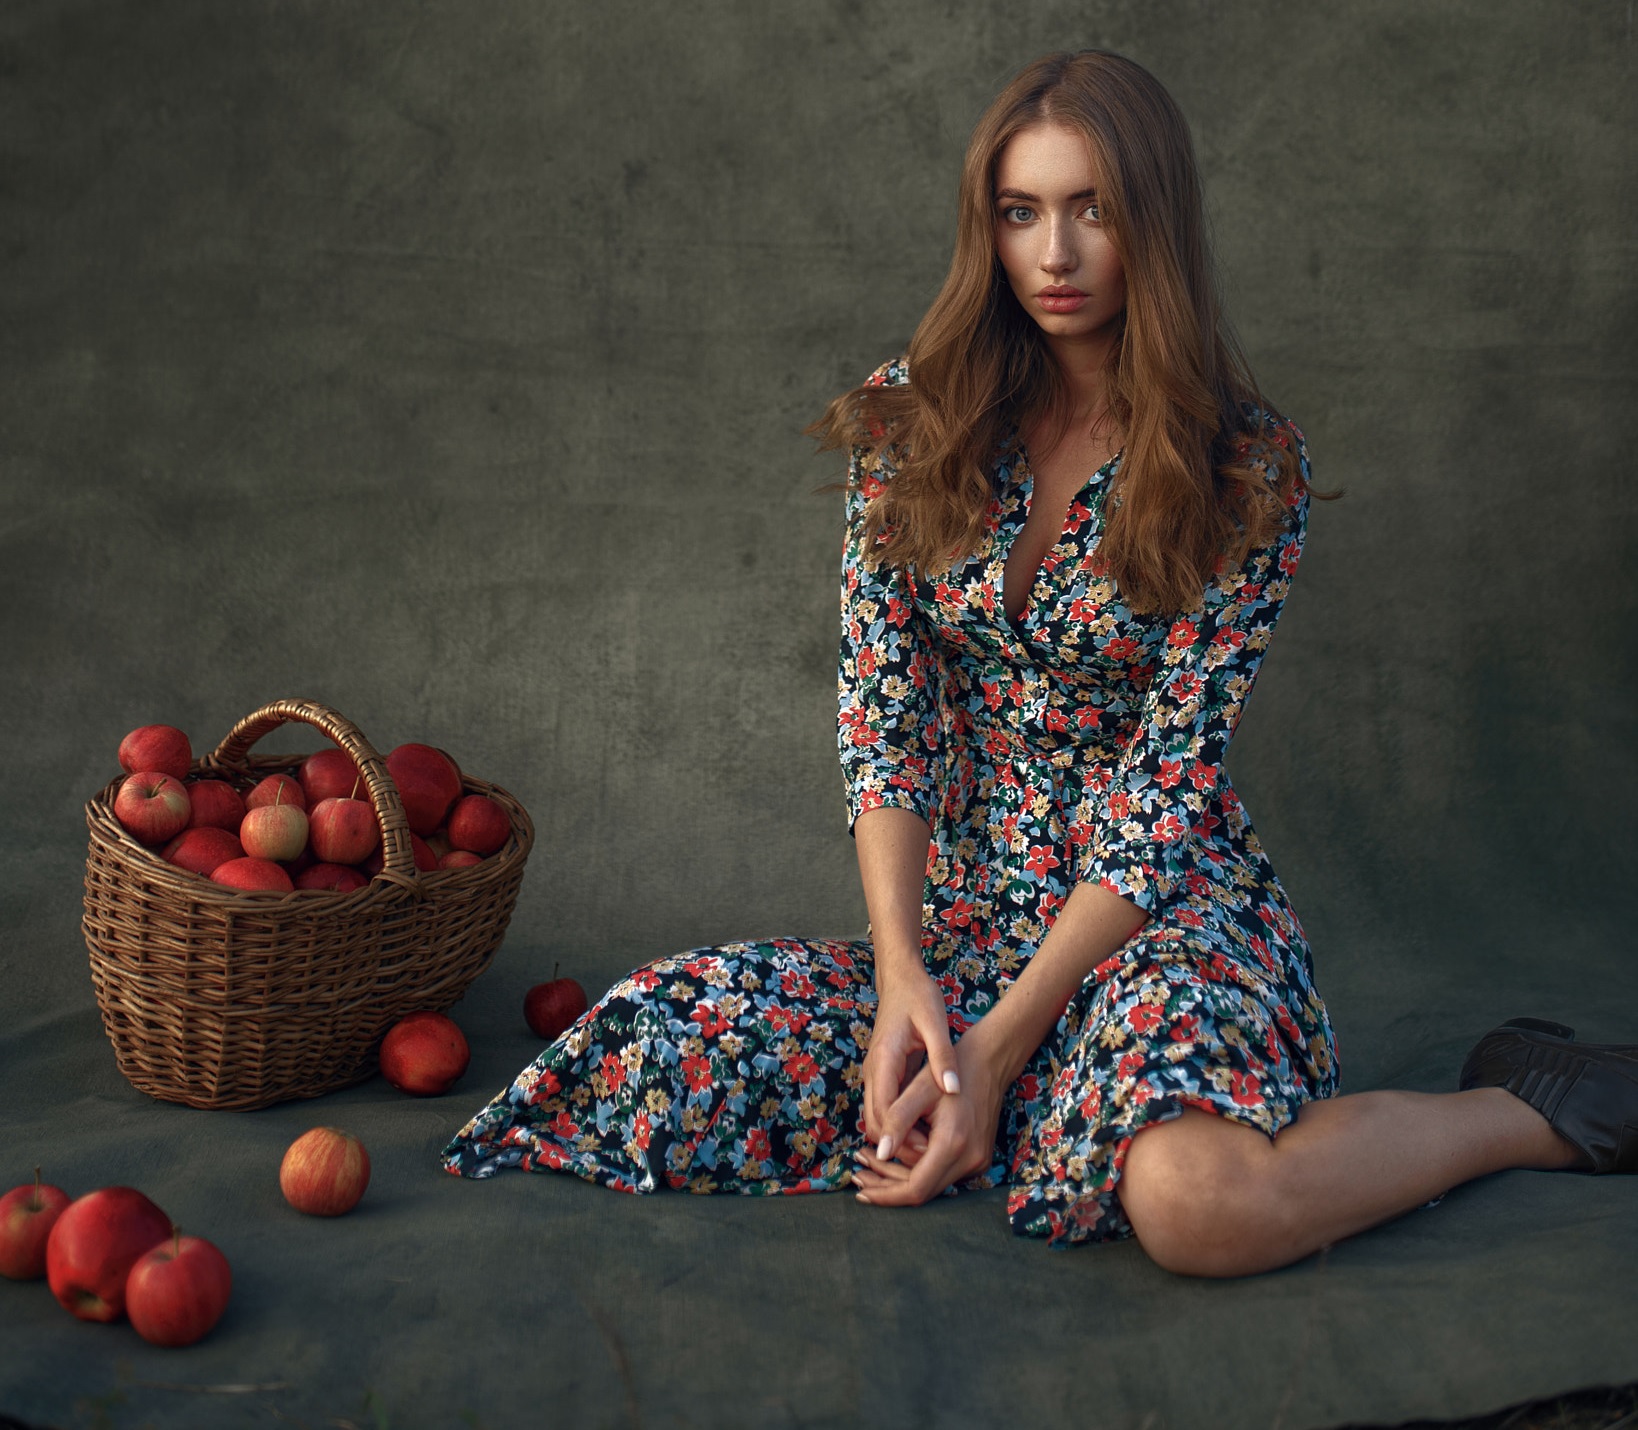 People 1638x1430 Maks Kuzin women brunette long hair wavy hair makeup looking at viewer dress open clothes cleavage flower dress colorful on the floor baskets food apples simple background